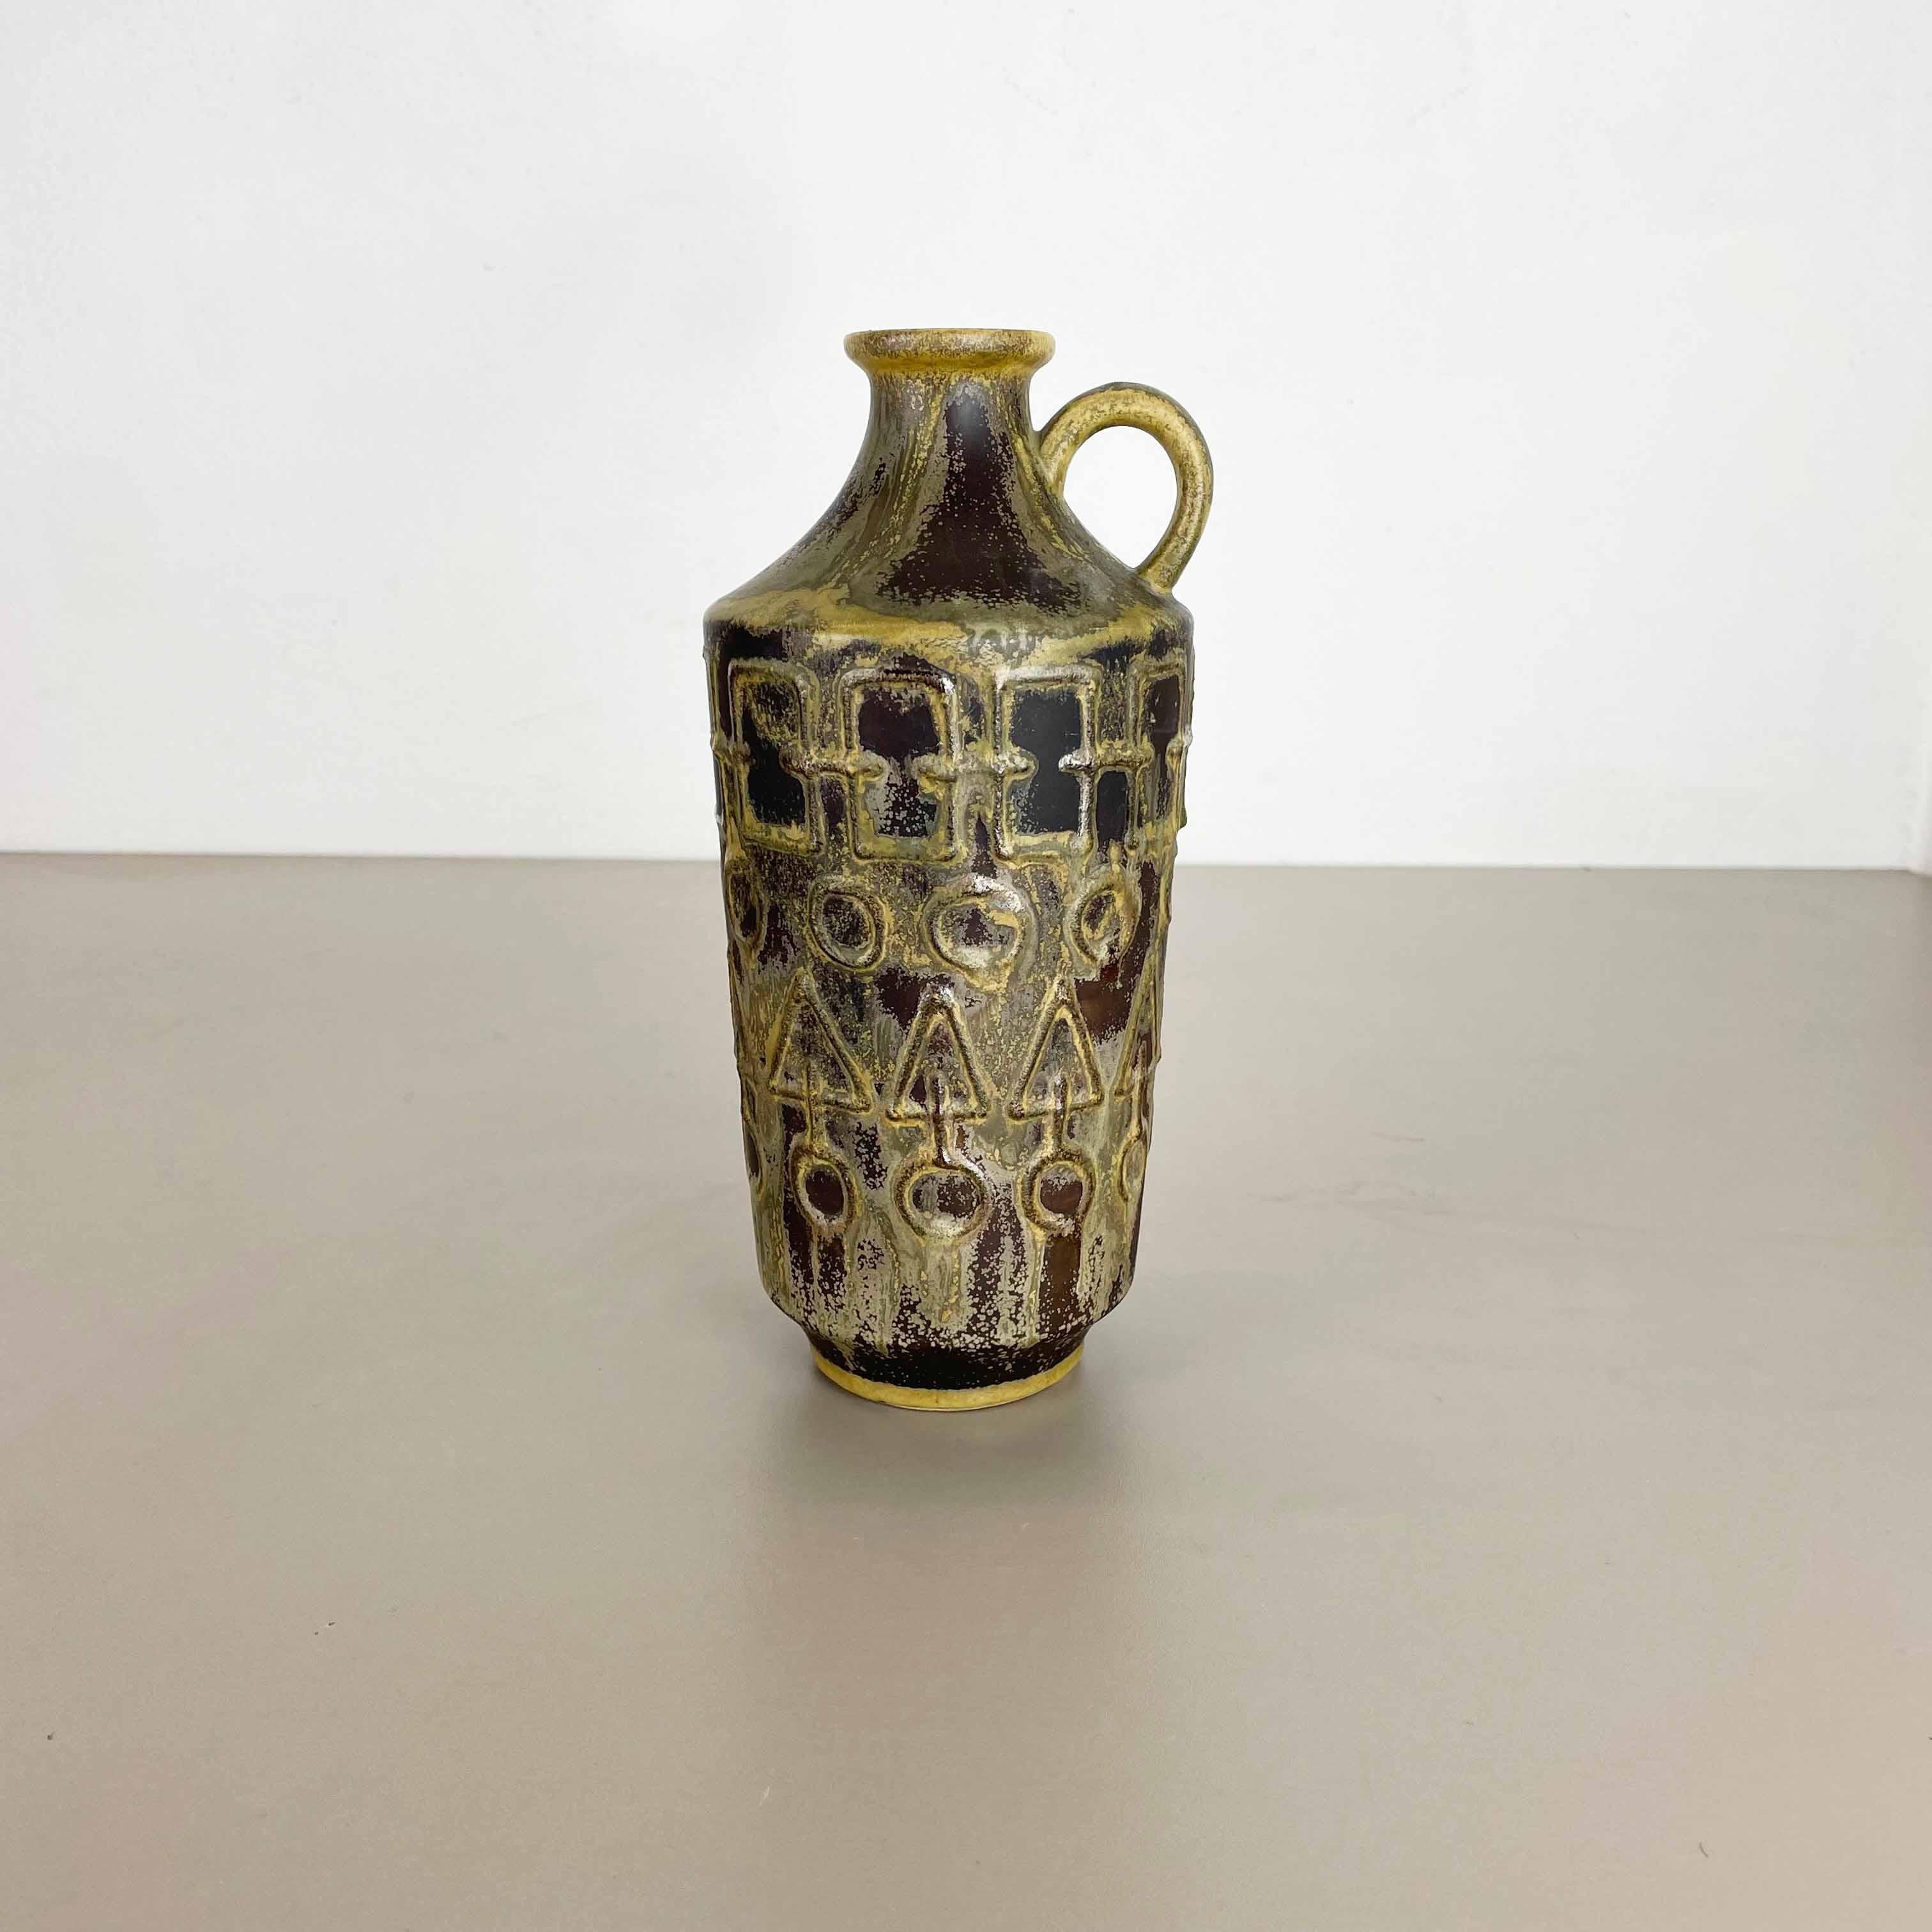 Article:

Pottery ceramic vase


Producer:

Simon Peter Gerz, Germany


Decade:

1960s



Description:

Original vintage 1960s pottery ceramic vase in Germany. High quality German production with a nice abstract coloration. The